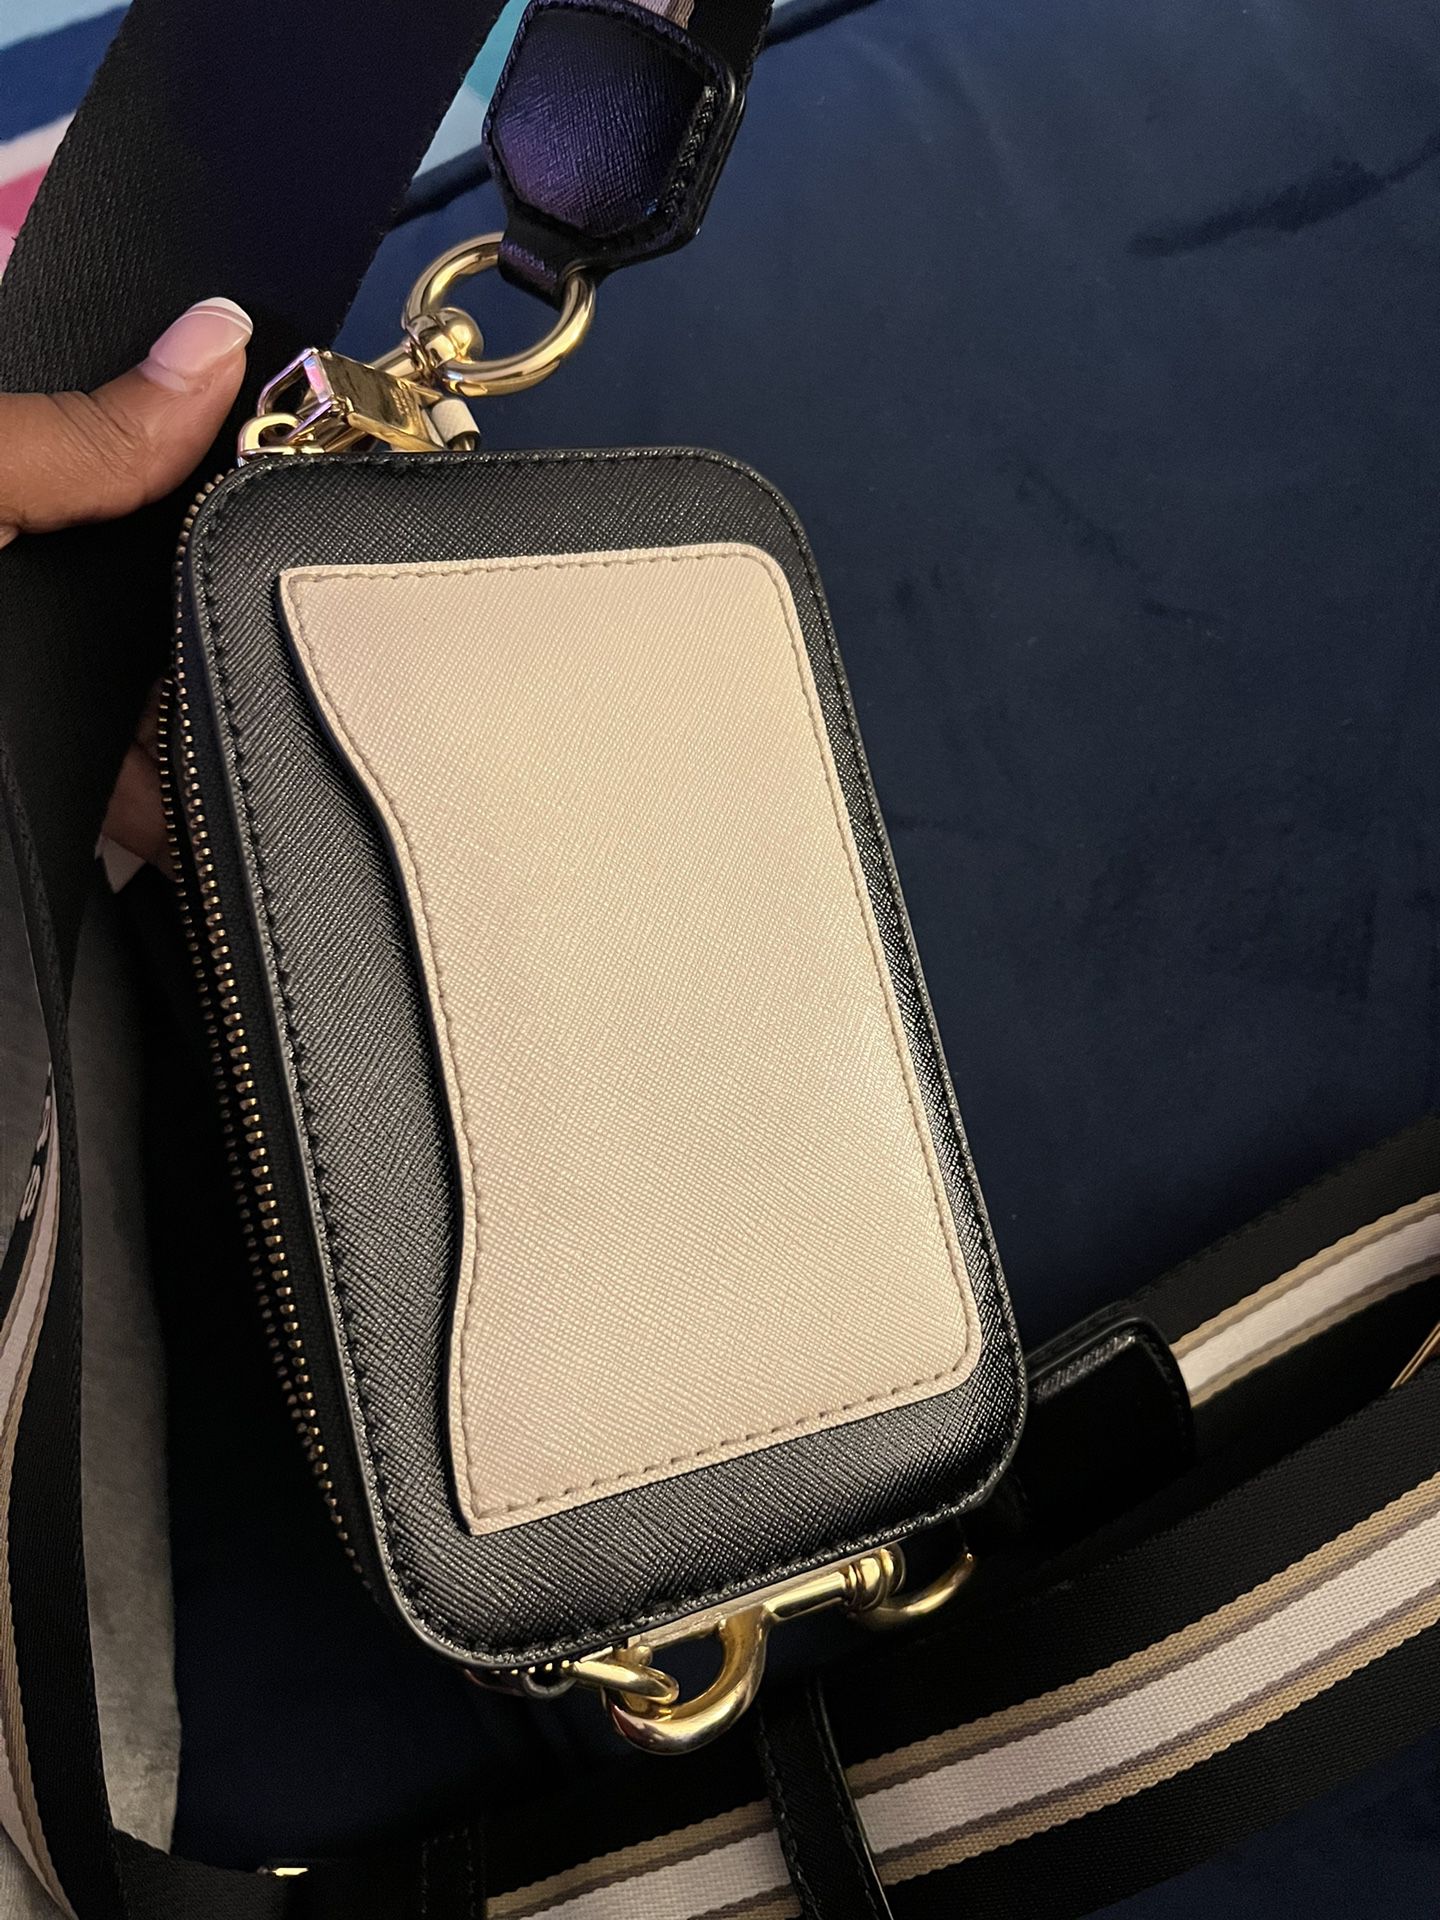 Used Authentic Marc Jacobs Snapshot Bag for Sale in St. Louis, MO - OfferUp